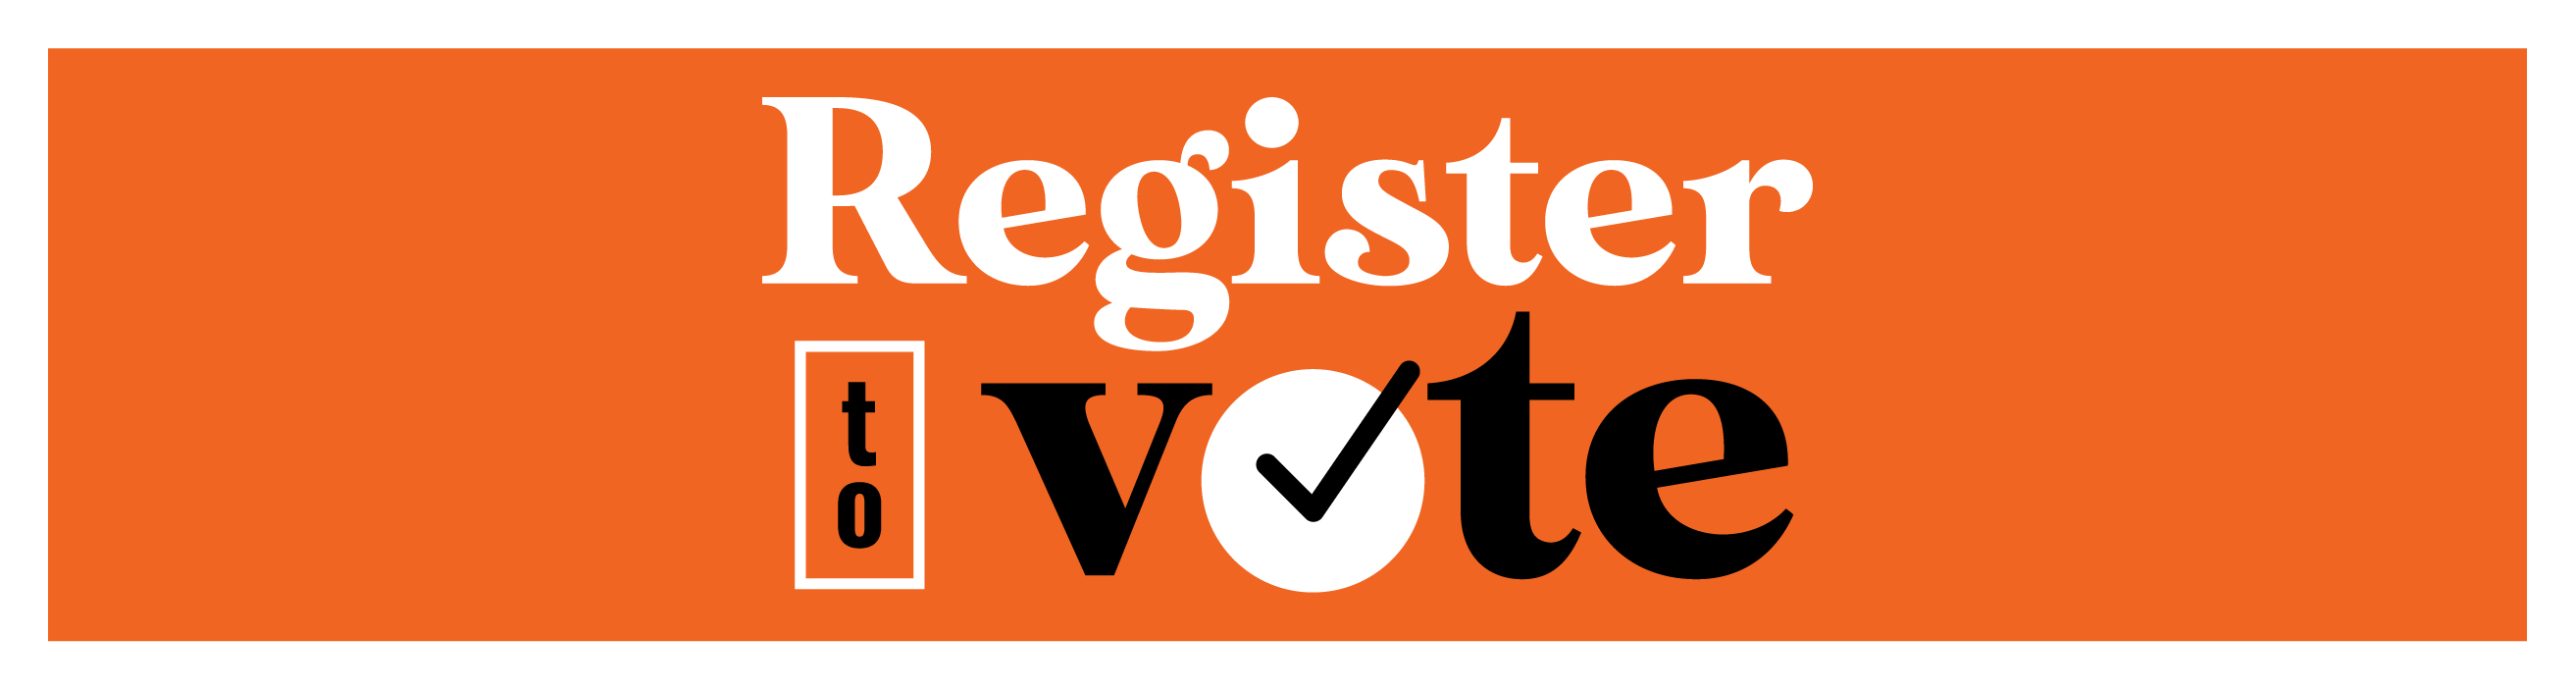 Register to Vote Today!